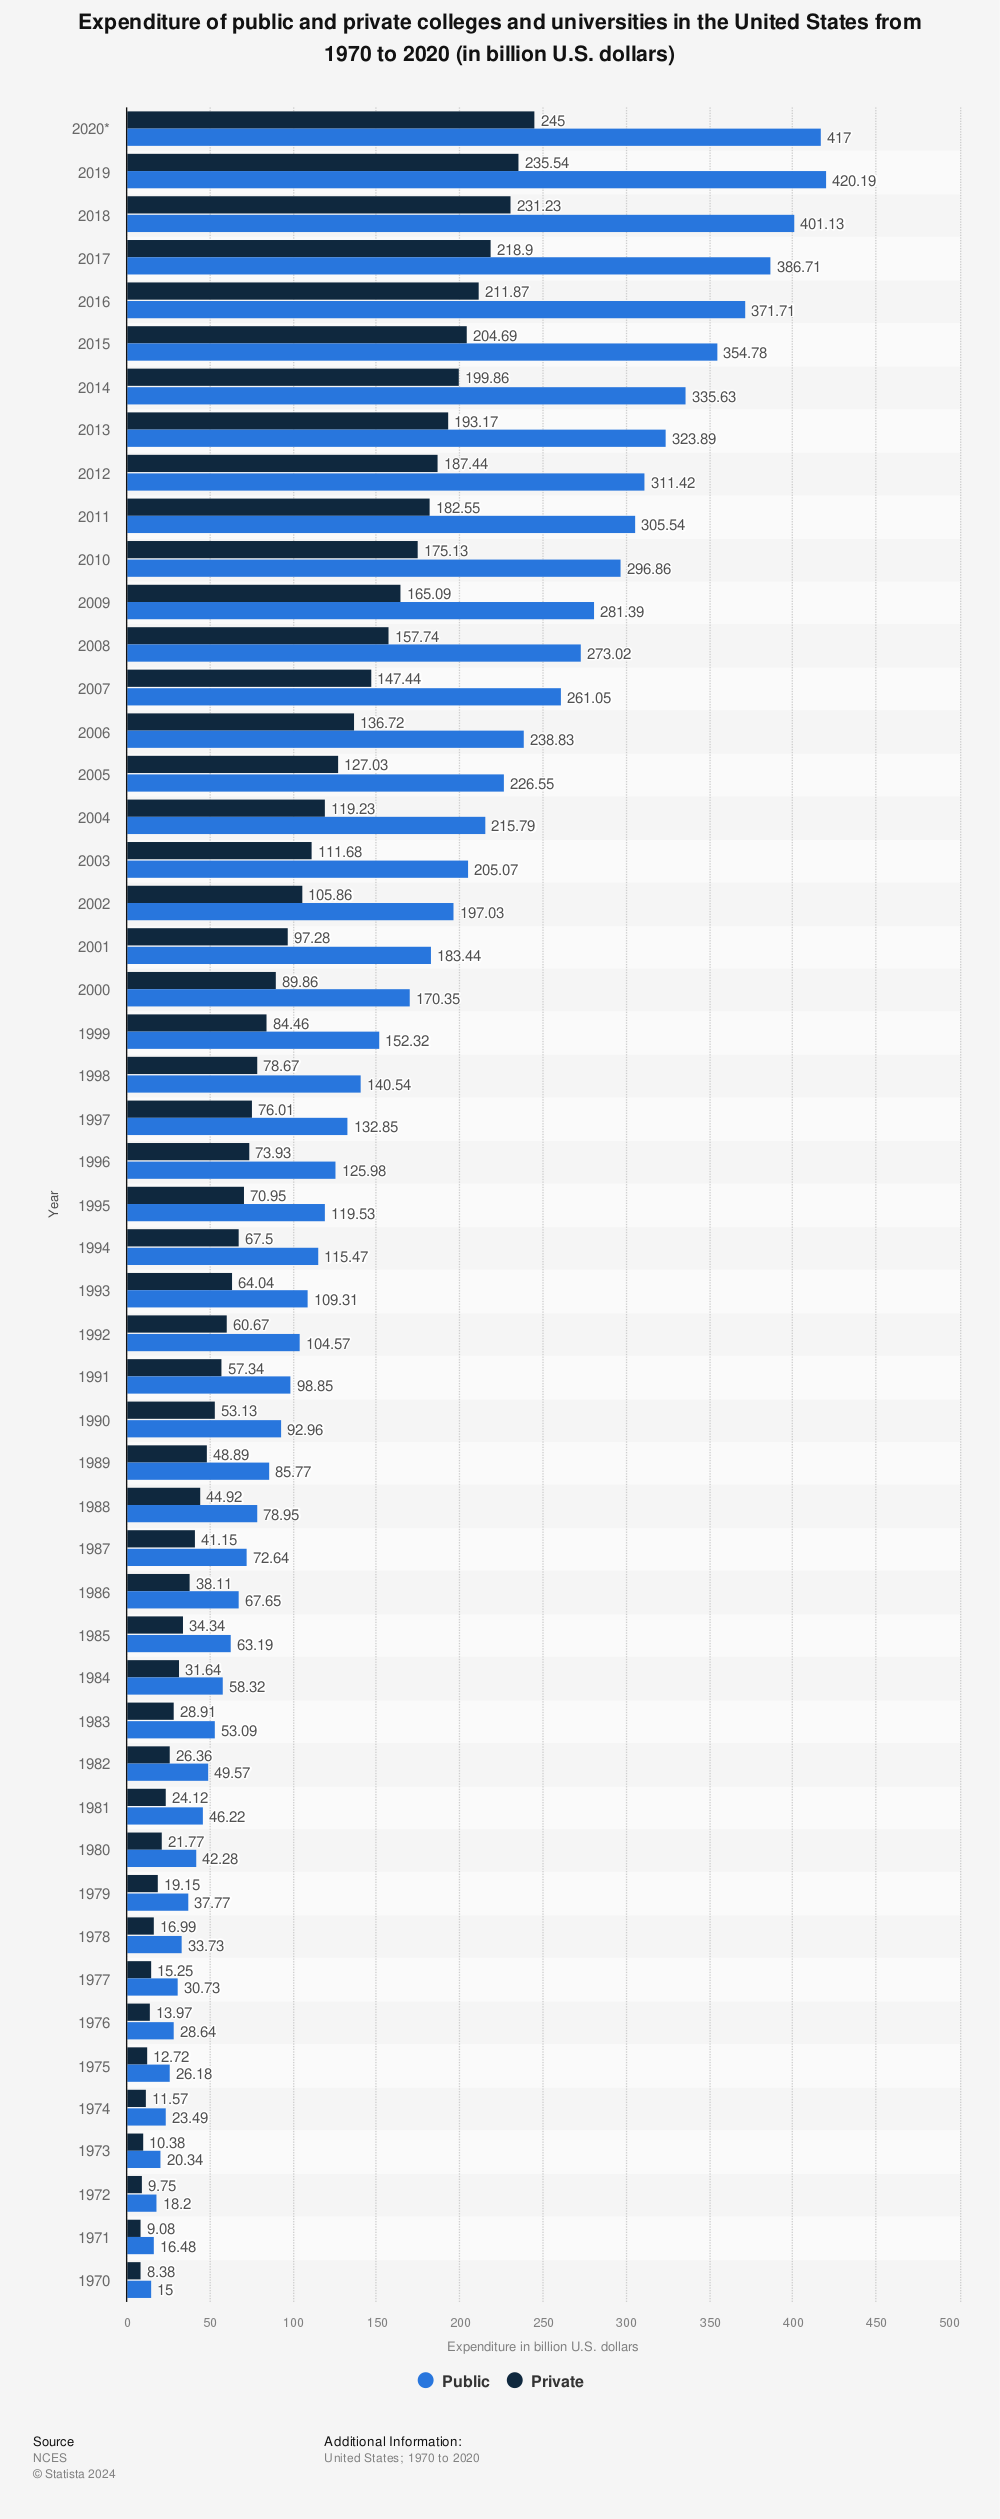 Statistic: Expenditure of public and private colleges and universities in the United States from 1970 to 2020 (in billion U.S. dollars) | Statista